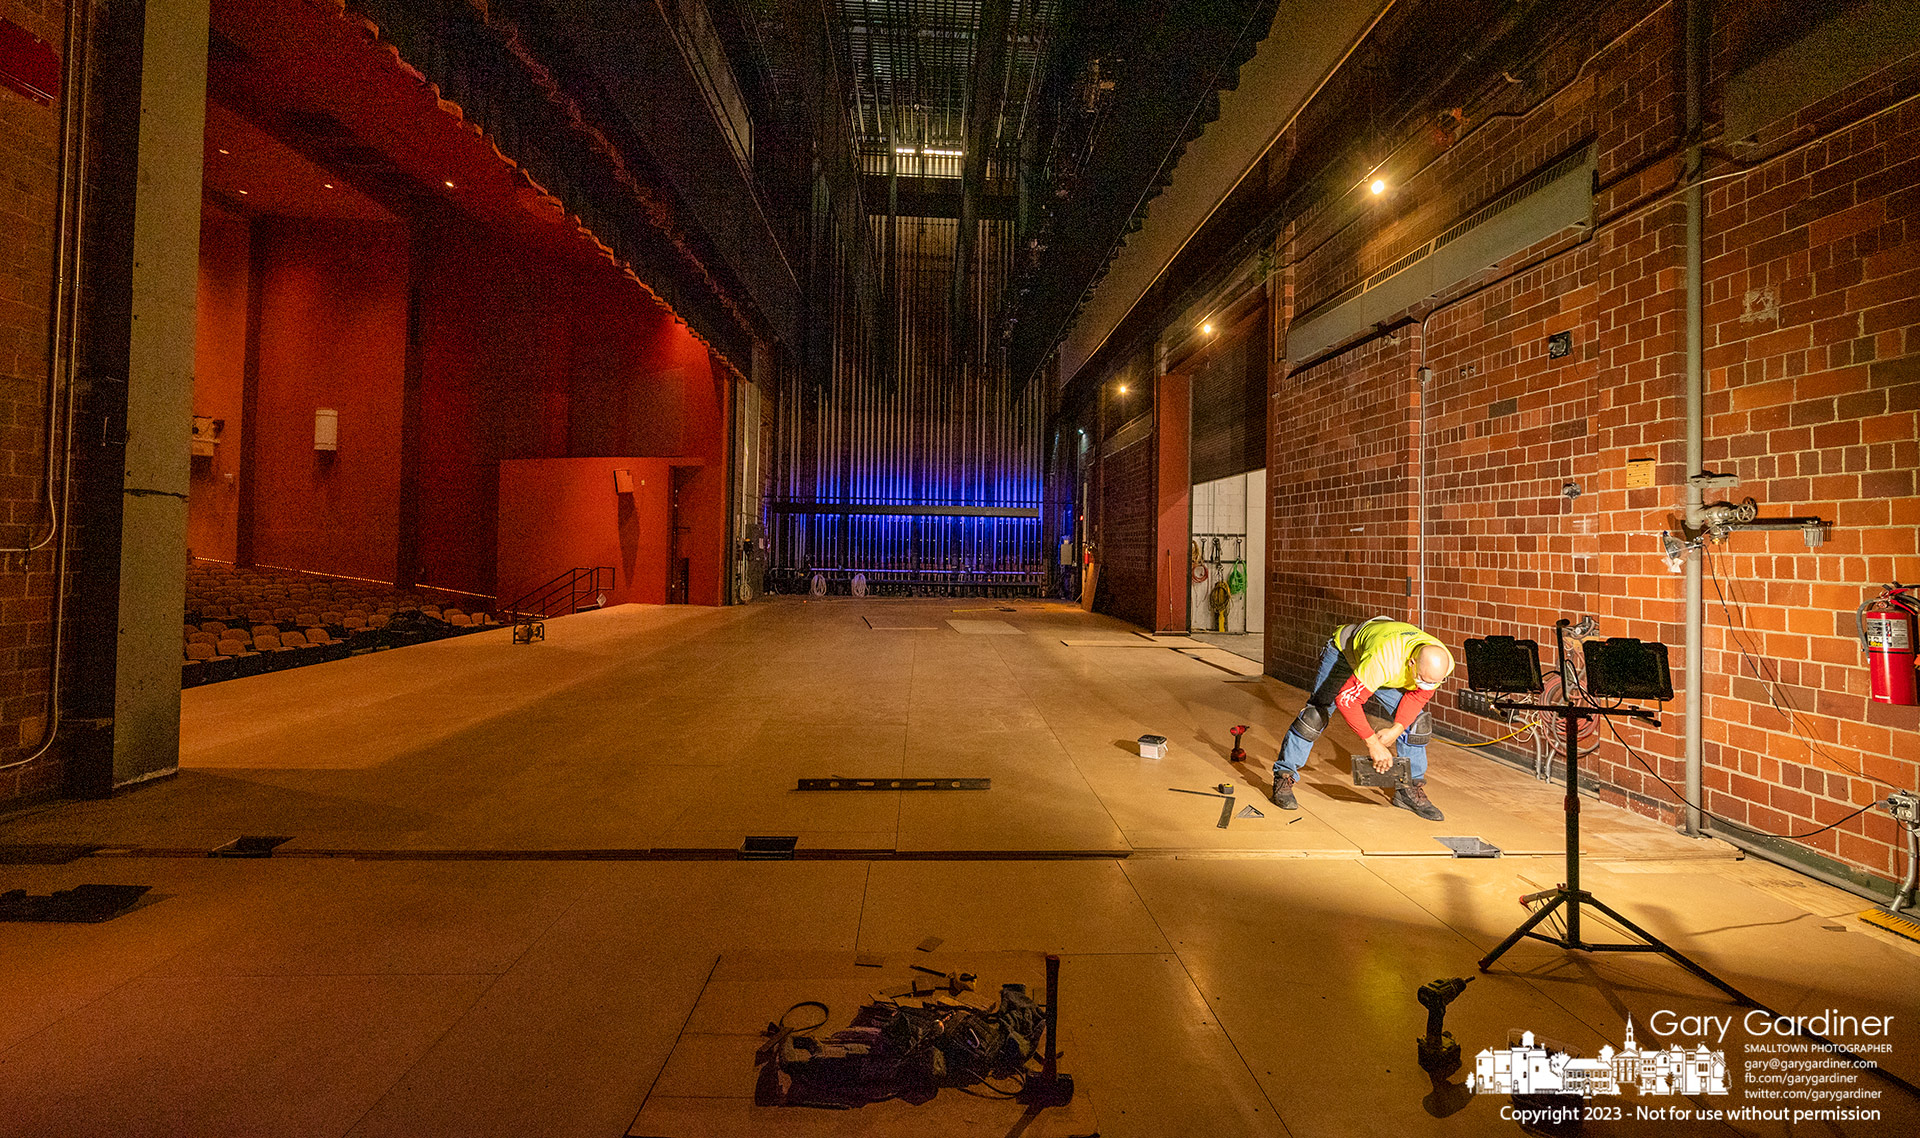 A worker checks alignment on one of the last sections of flooring installed in the stage in Cowan Hall at Otterbein University completing repairs to the water-damaged structure before it gets a final coat of paint. My Final Photo for March 29, 2023.